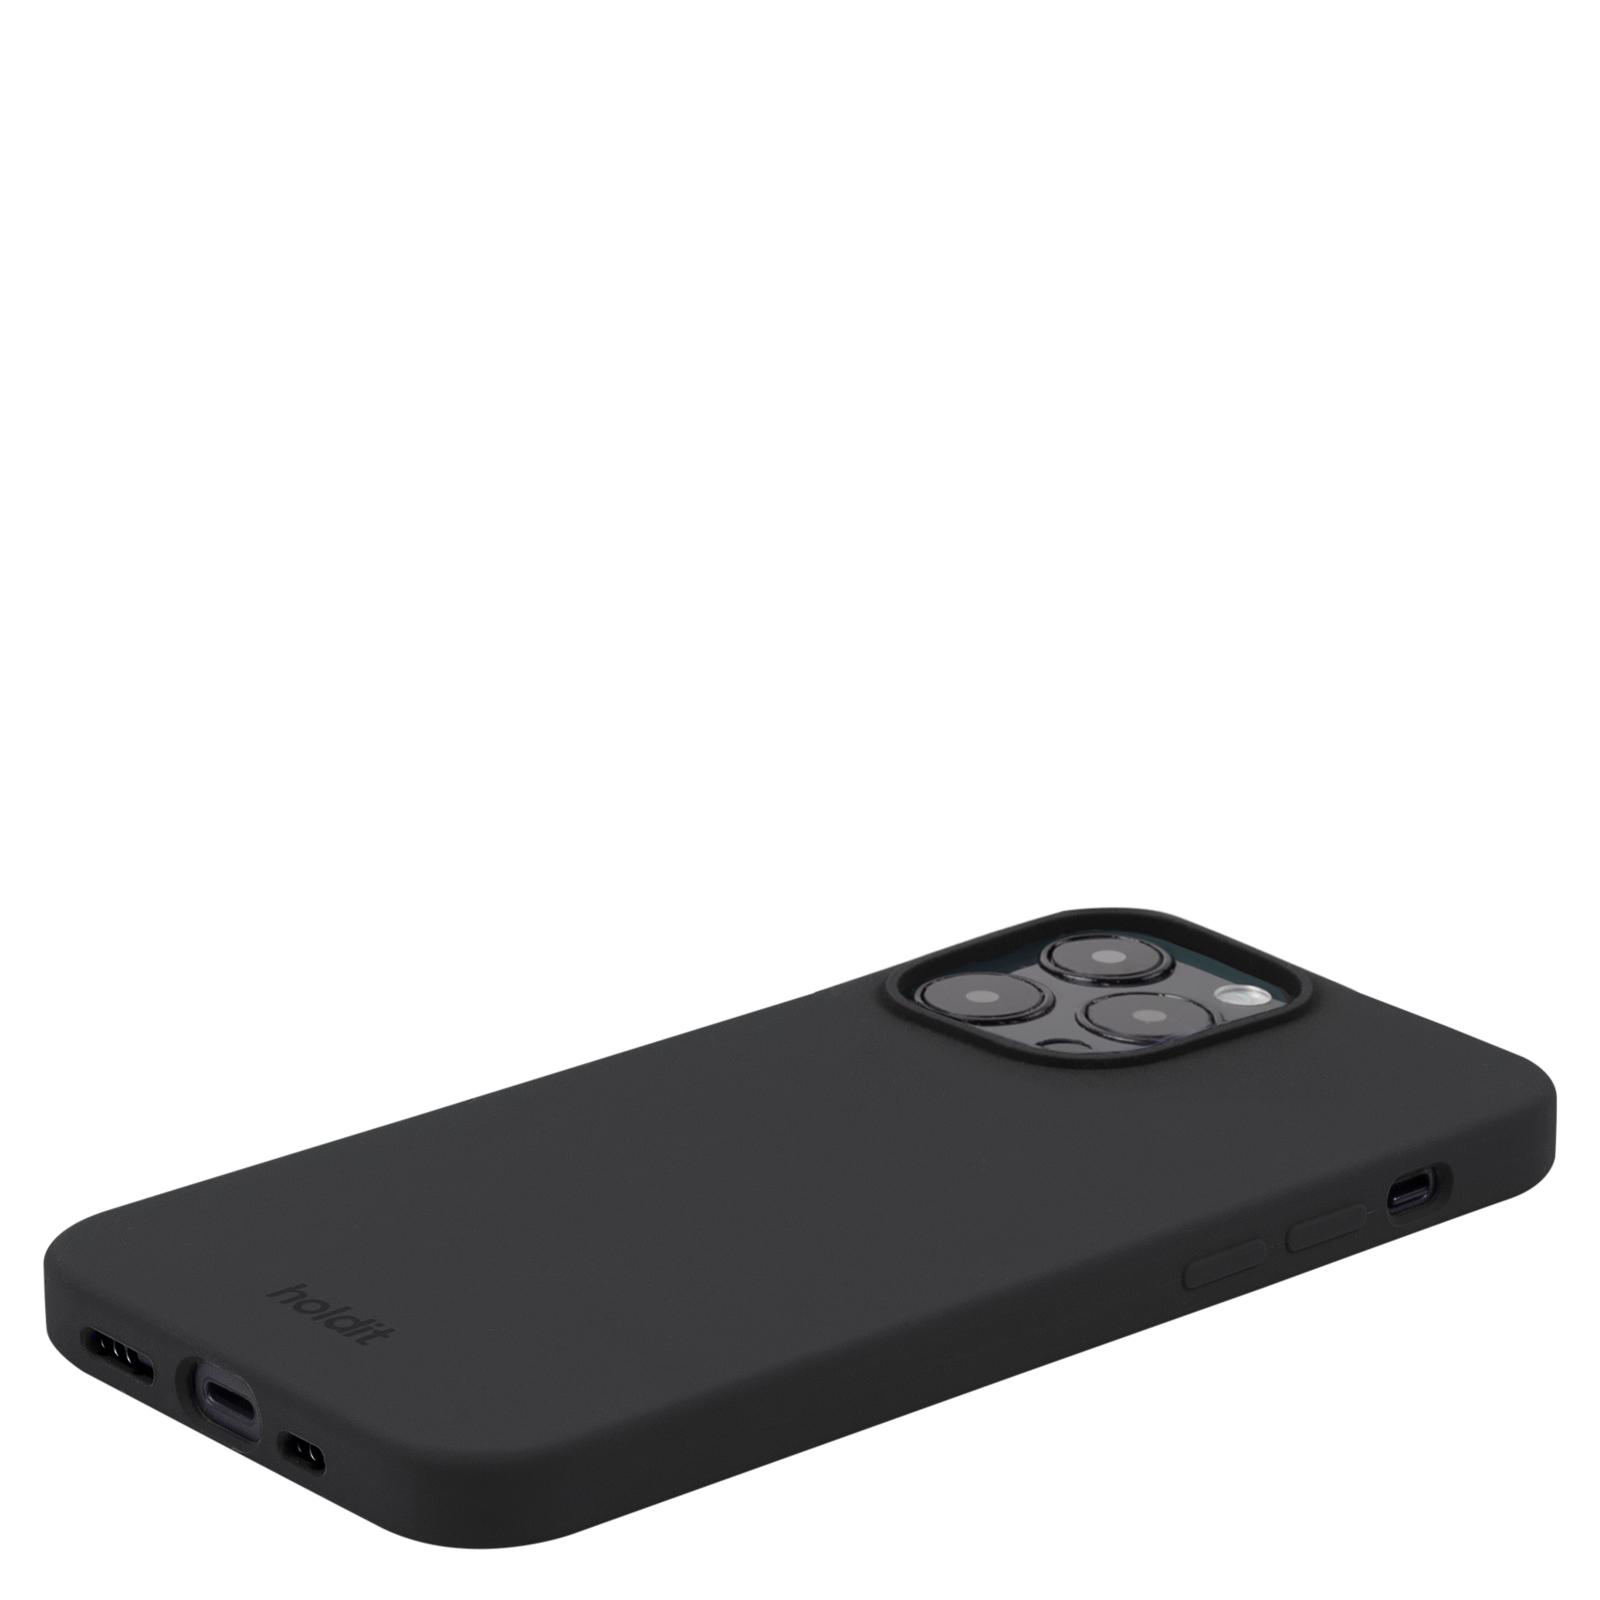 HOLDIT Silicone 14 Max, Case, iPhone Black Pro Apple, Backcover